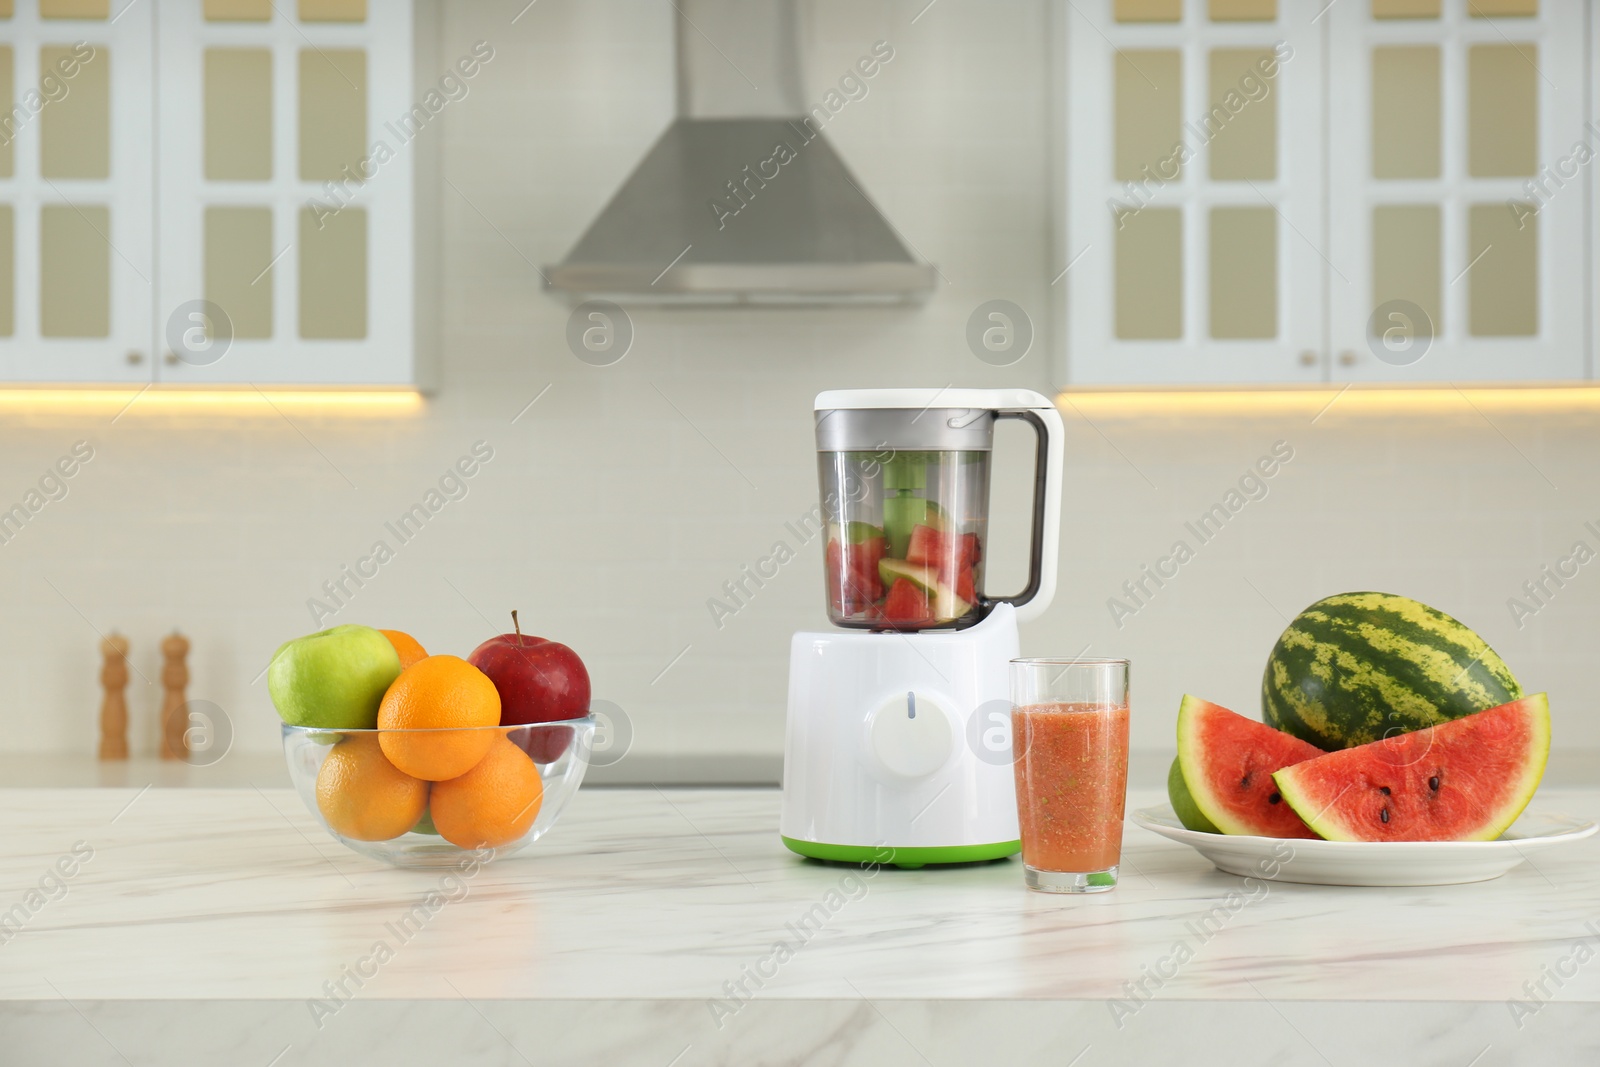 Photo of Blender and smoothie ingredients on table in kitchen